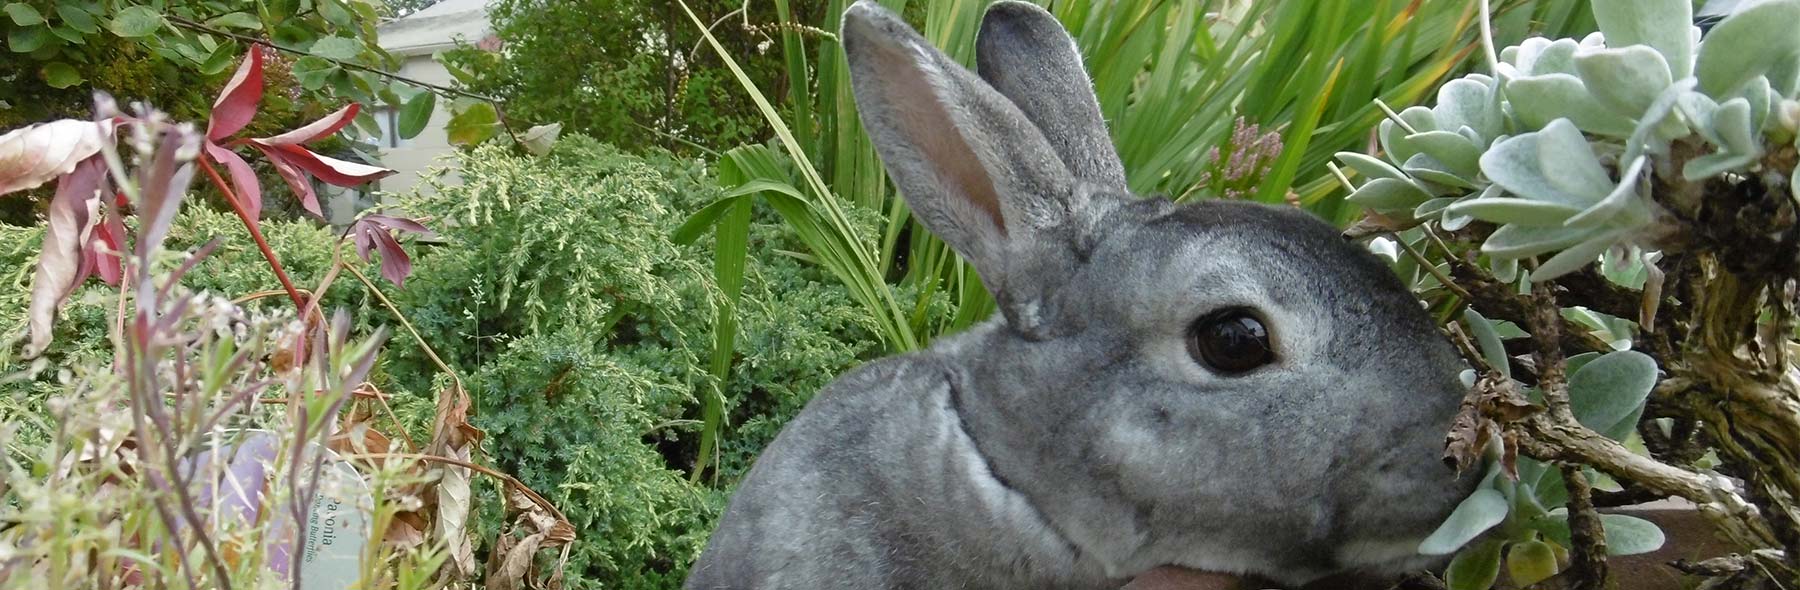 What greens are poisonous to rabbits?